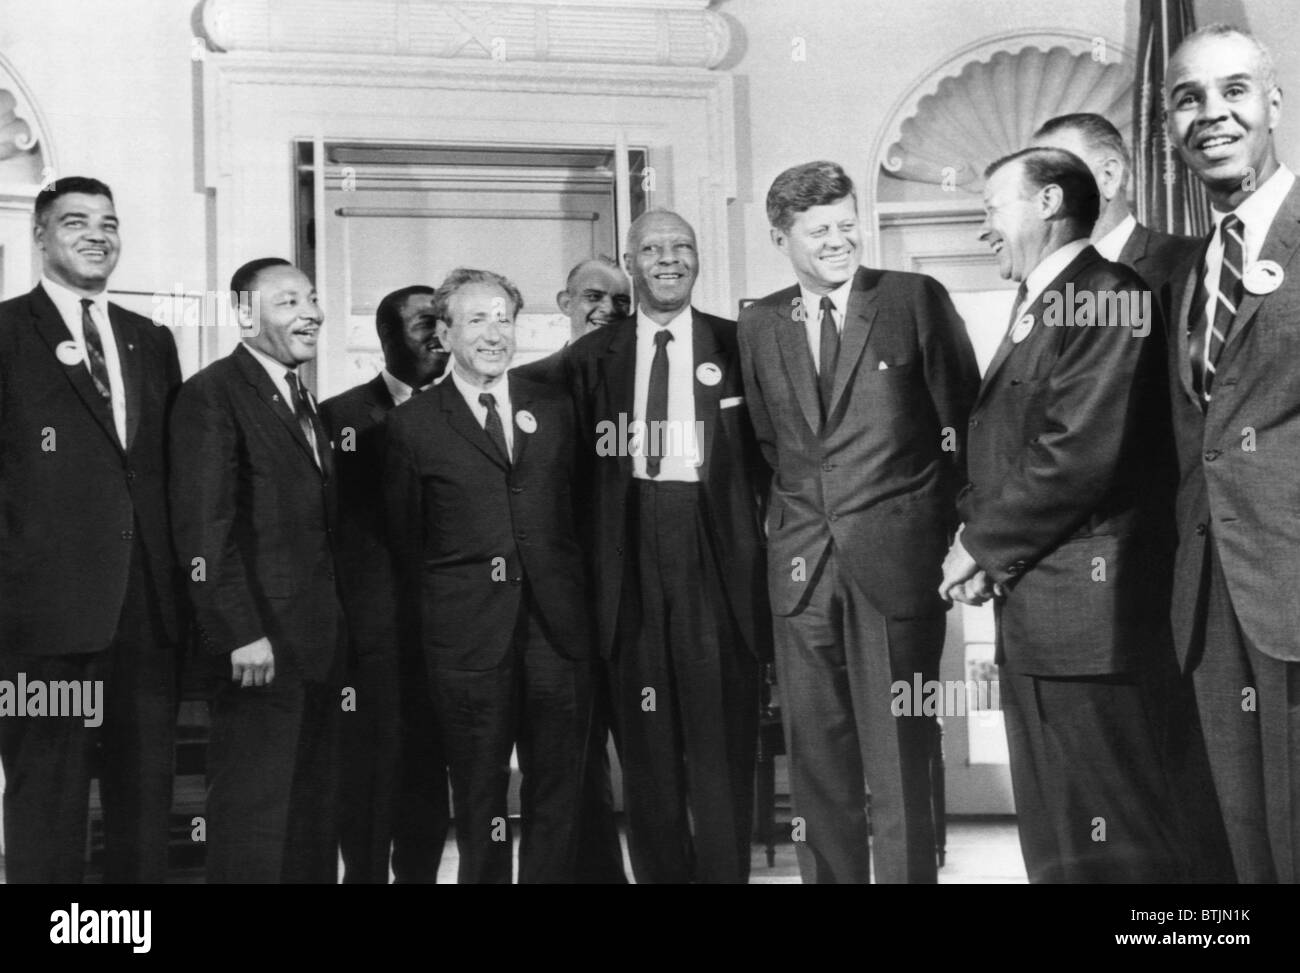 Vordere Reihe, L-r: Whitney Young, Martin Luther King, Rabbiner Joachim Prinz, A. Philip Randolph, Kennedy, Walter Reuther, Roy Stockfoto